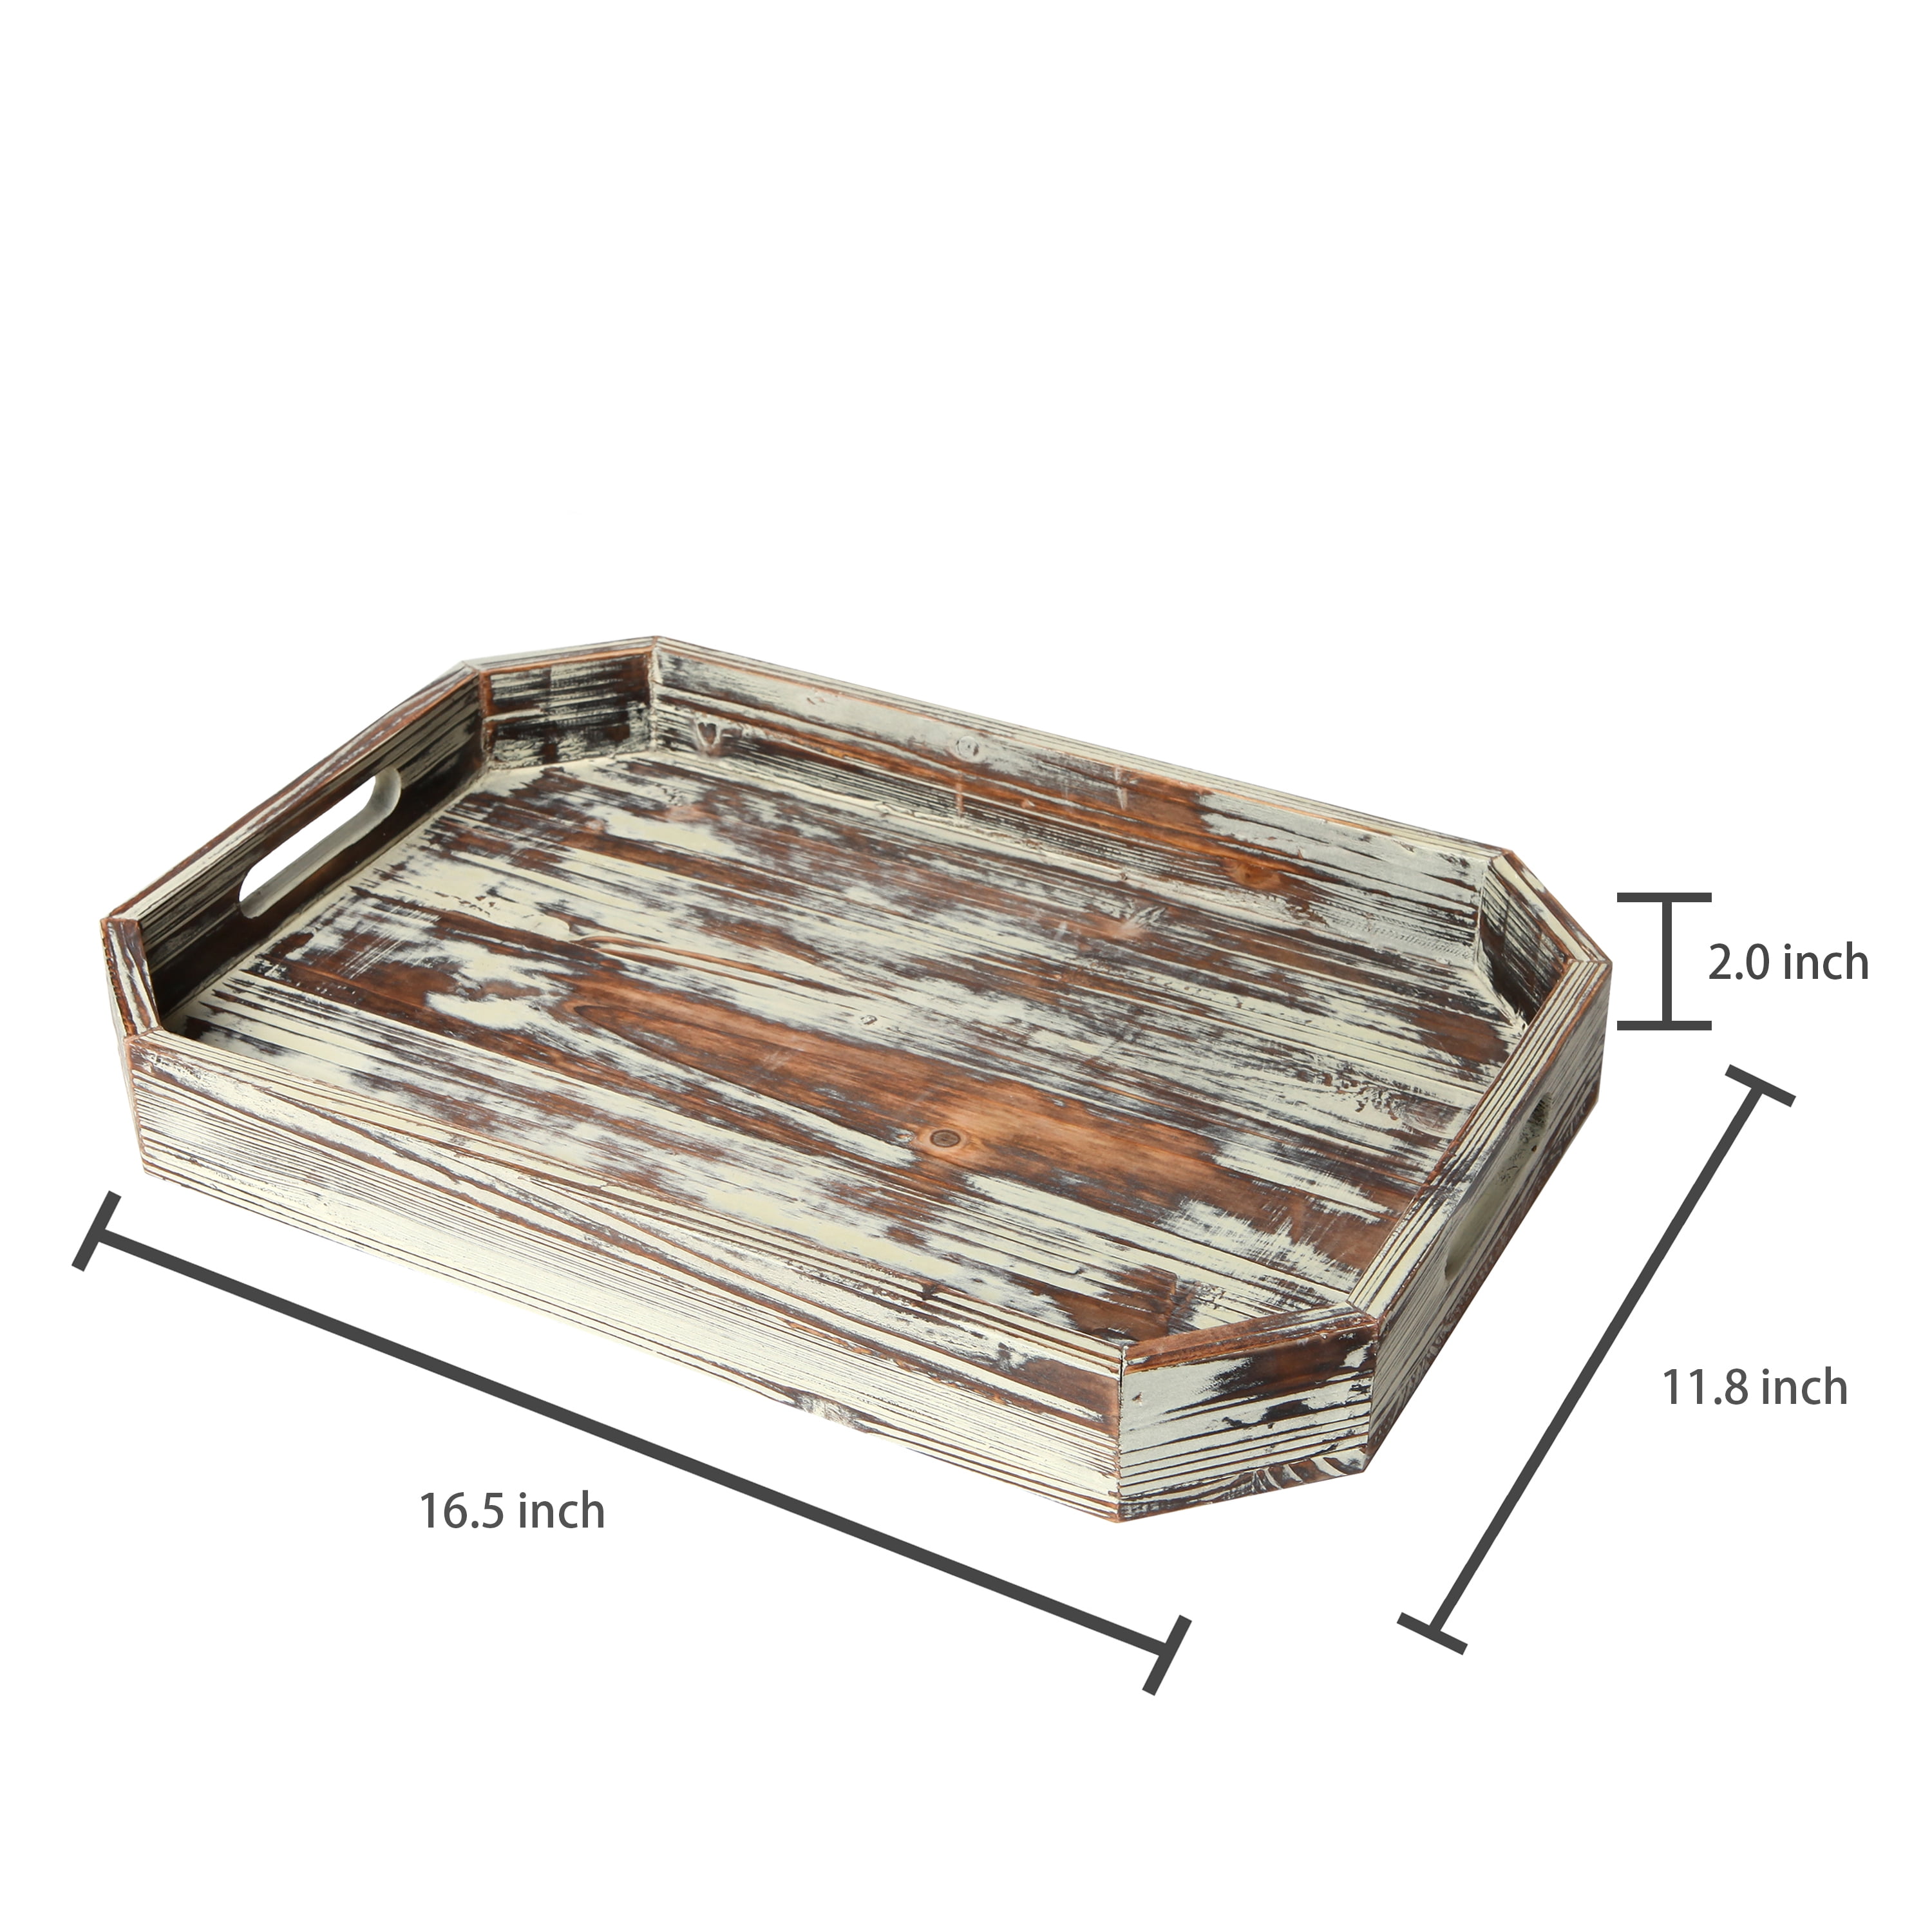 MyGift Rustic Grey Wood Serving Tray with Handles